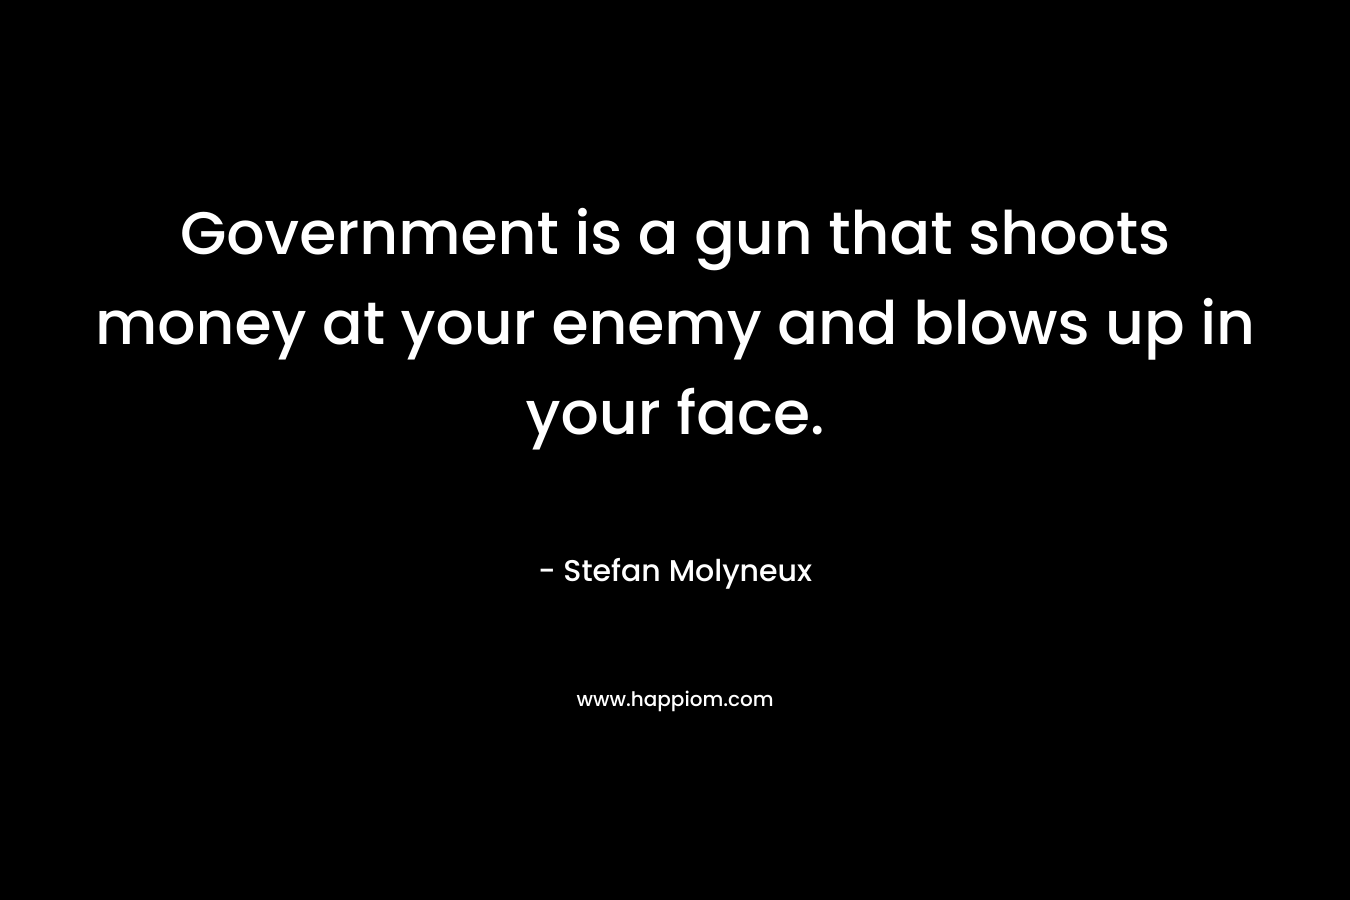 Government is a gun that shoots money at your enemy and blows up in your face.